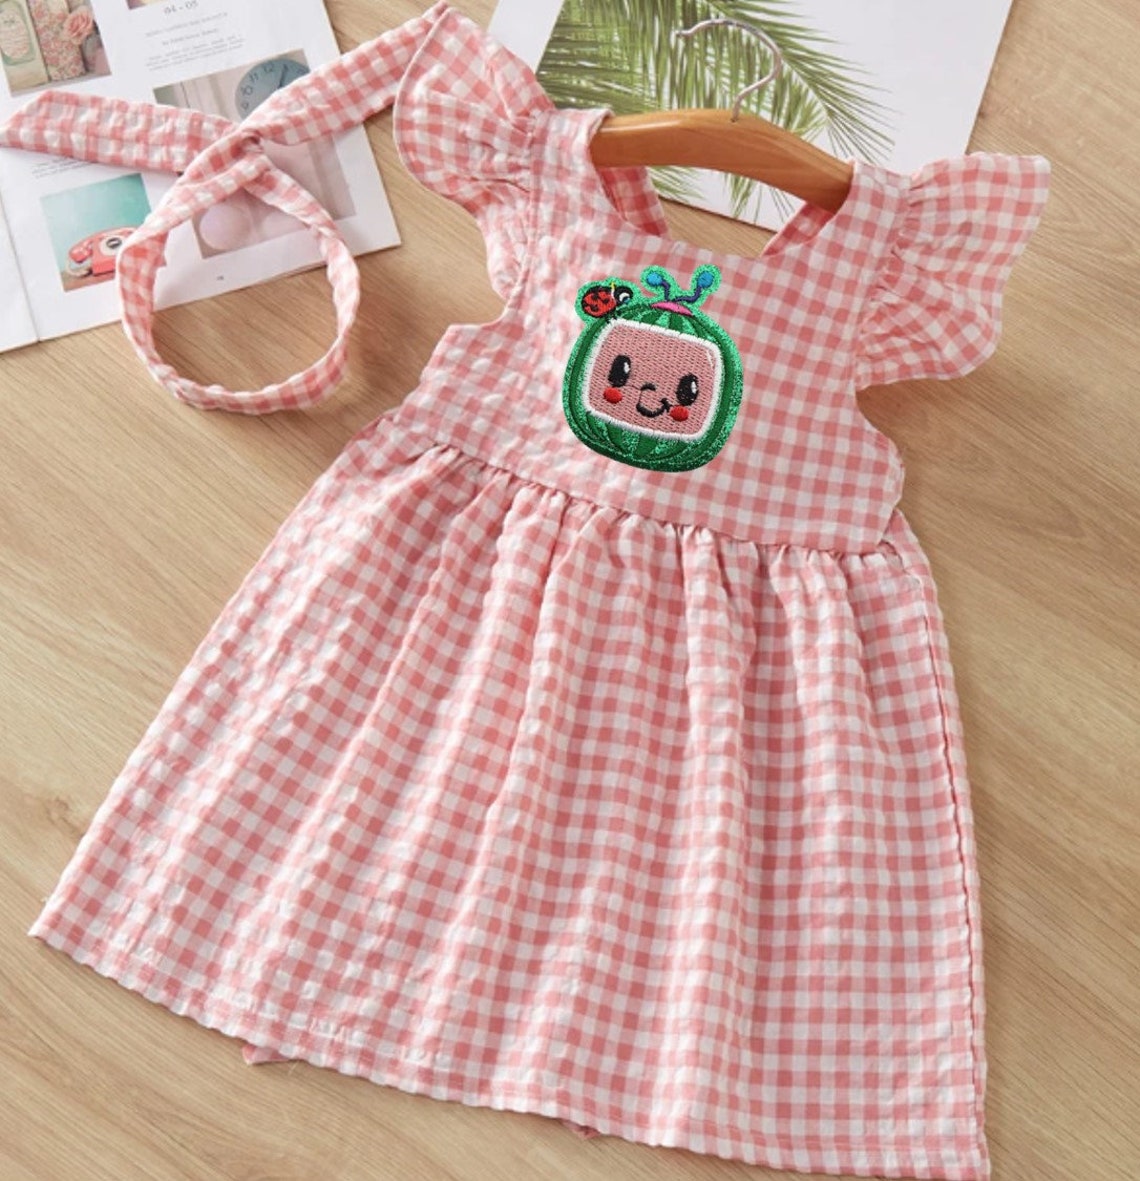 Cocomelon Pink Gingham Baby Girl Dress Clothes Set Photoshoot | Etsy